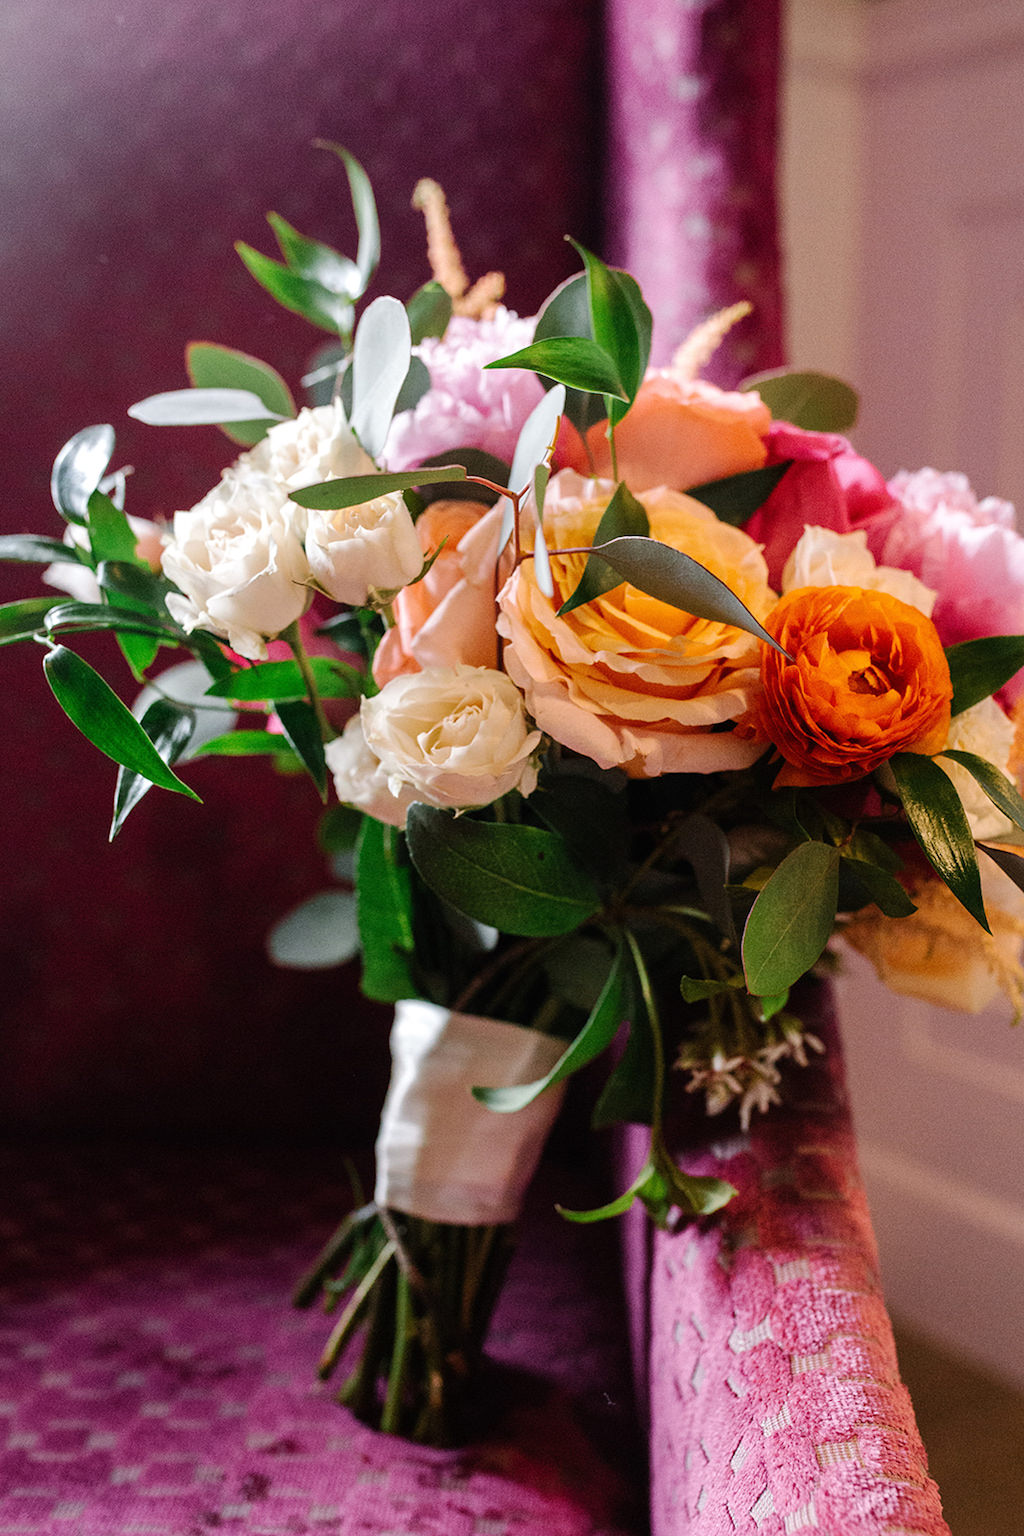 Colorful Bride Wedding Bouquet, Ivory, White, Pink, Orange, Peach and Greenery Flowers